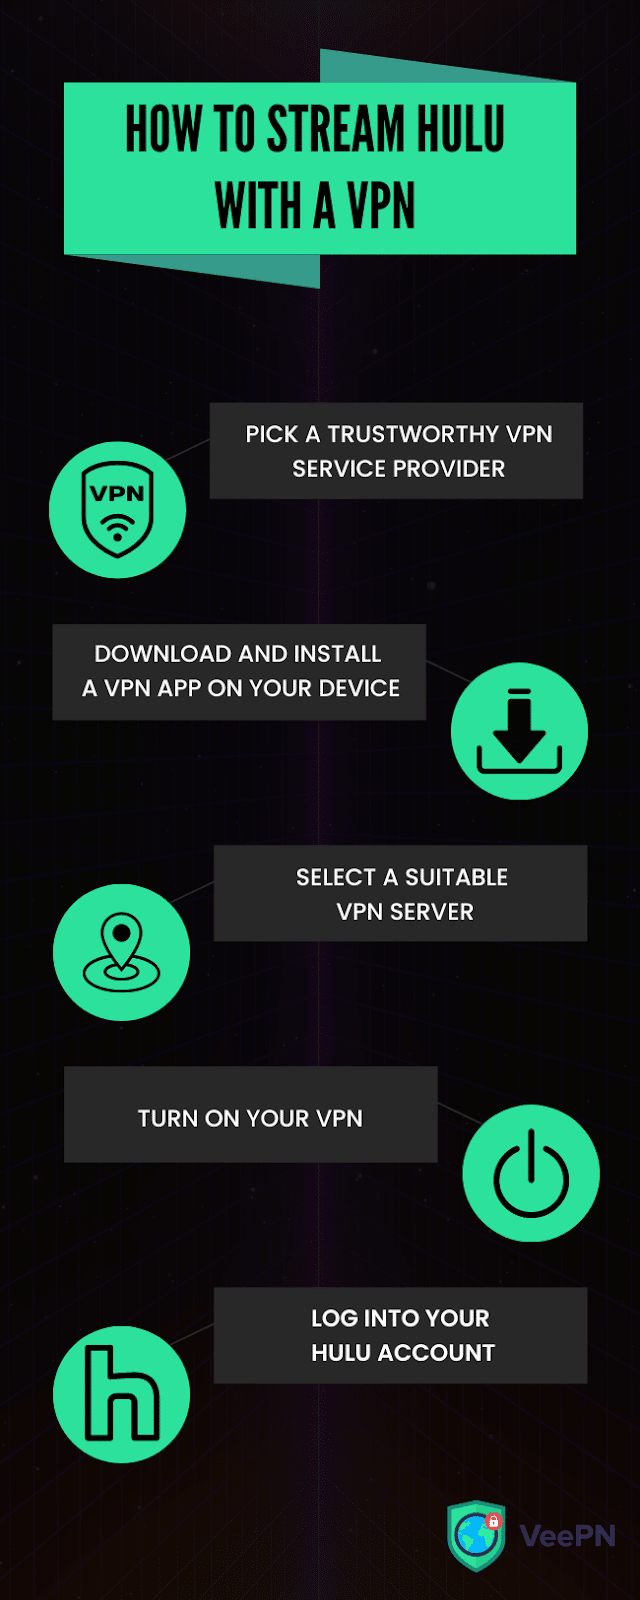 A guide on how to stream Hulu with a VPN